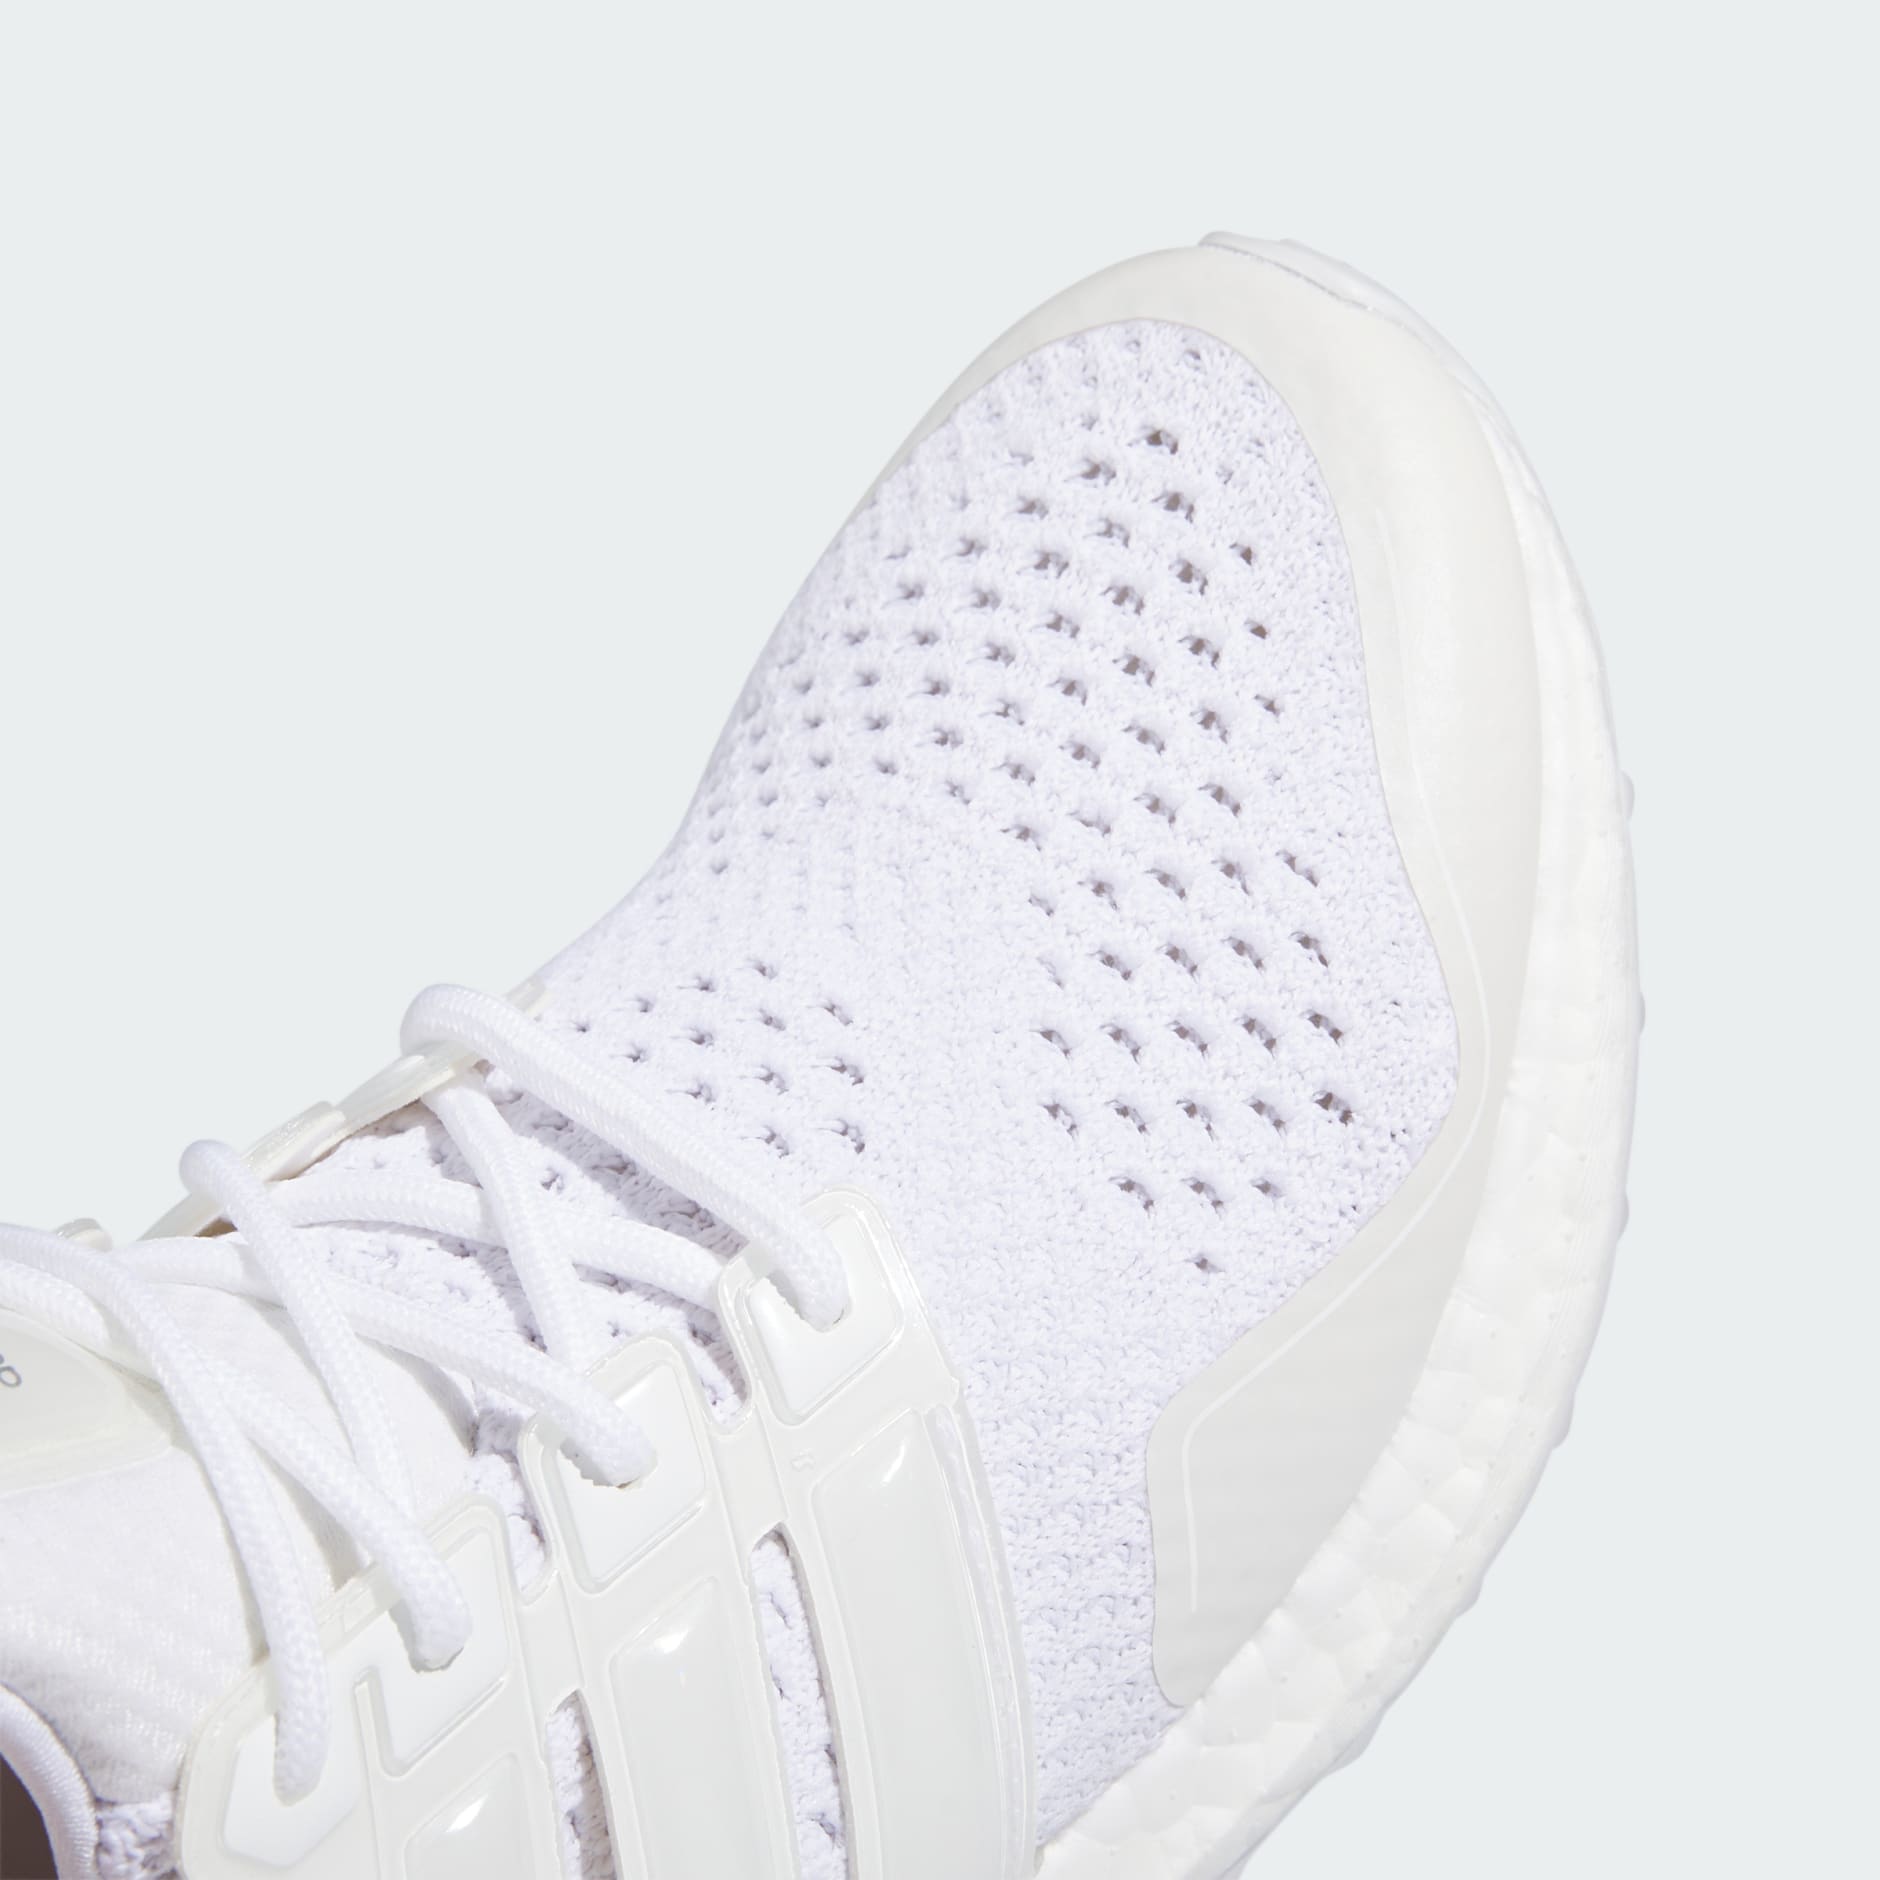 Women's Shoes - Ultraboost 1.0 Shoes - White